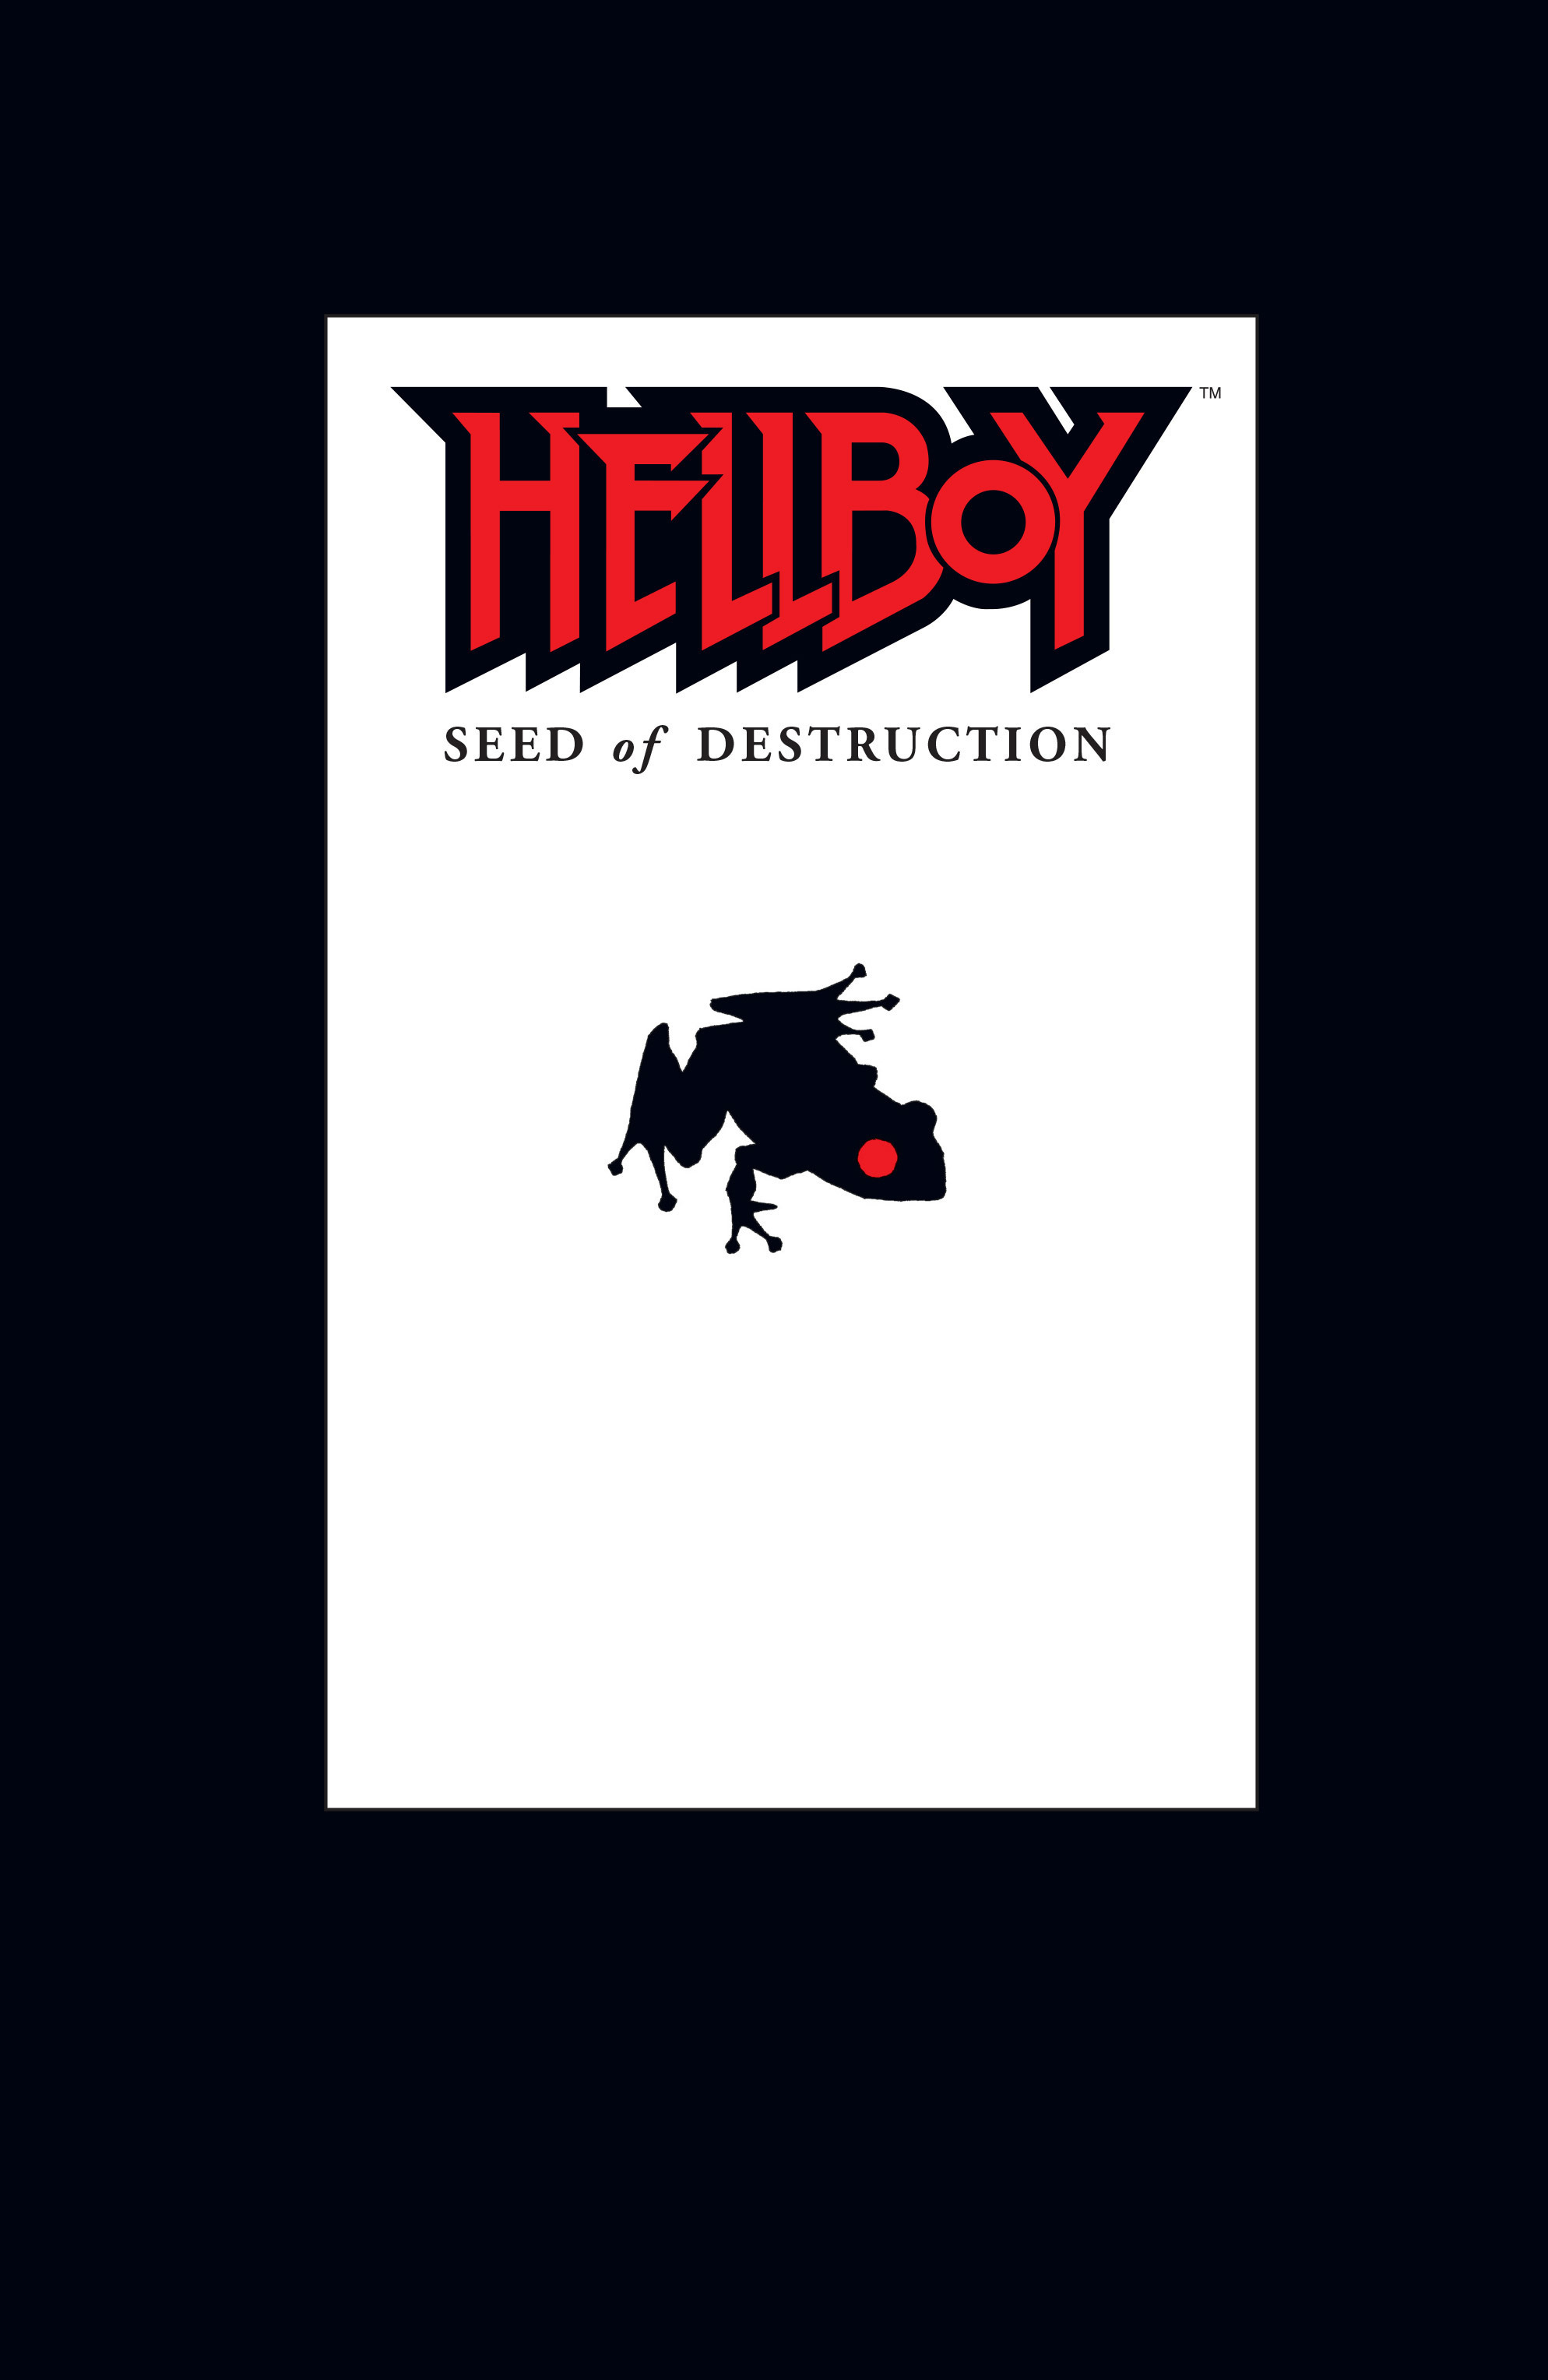 Read online Hellboy comic -  Issue #1 - 3